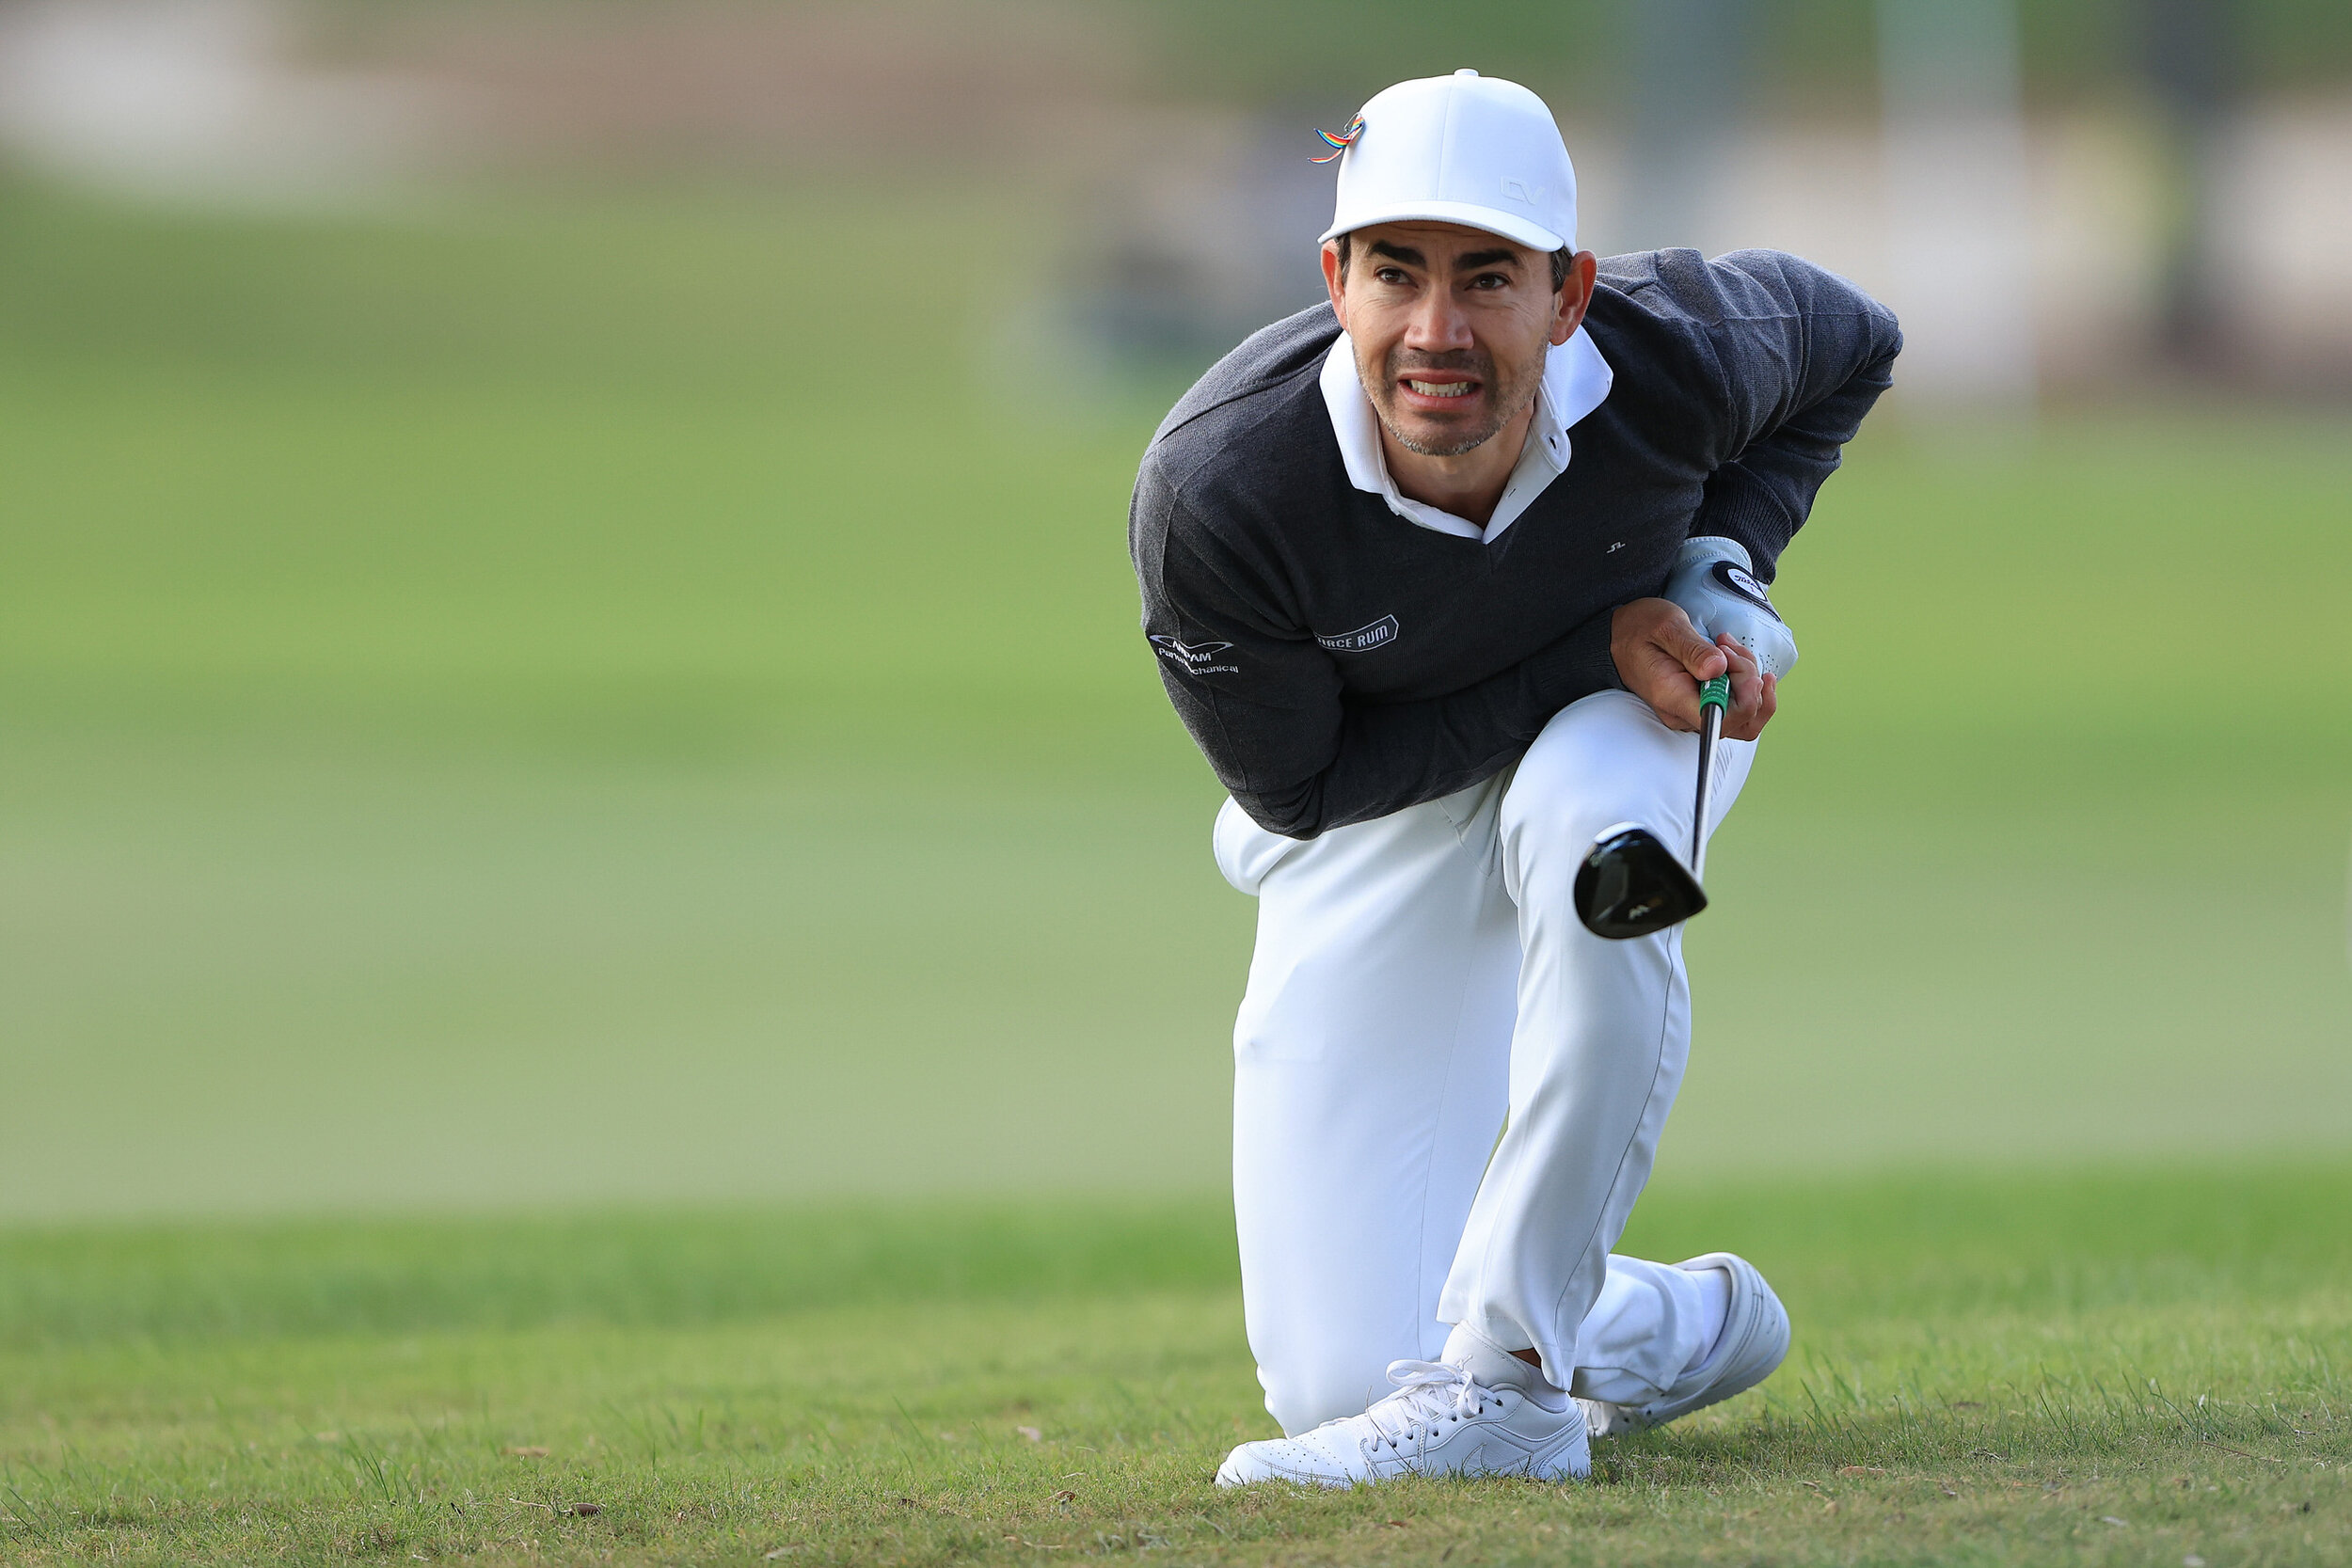  ST SIMONS ISLAND, GEORGIA - NOVEMBER 19: Camilo Villegas of Colombia watches his second shot on the seventh hole during the first round of The RSM Classic at the Seaside Course at Sea Island Golf Club on November 19, 2020 in St Simons Island, Georgi